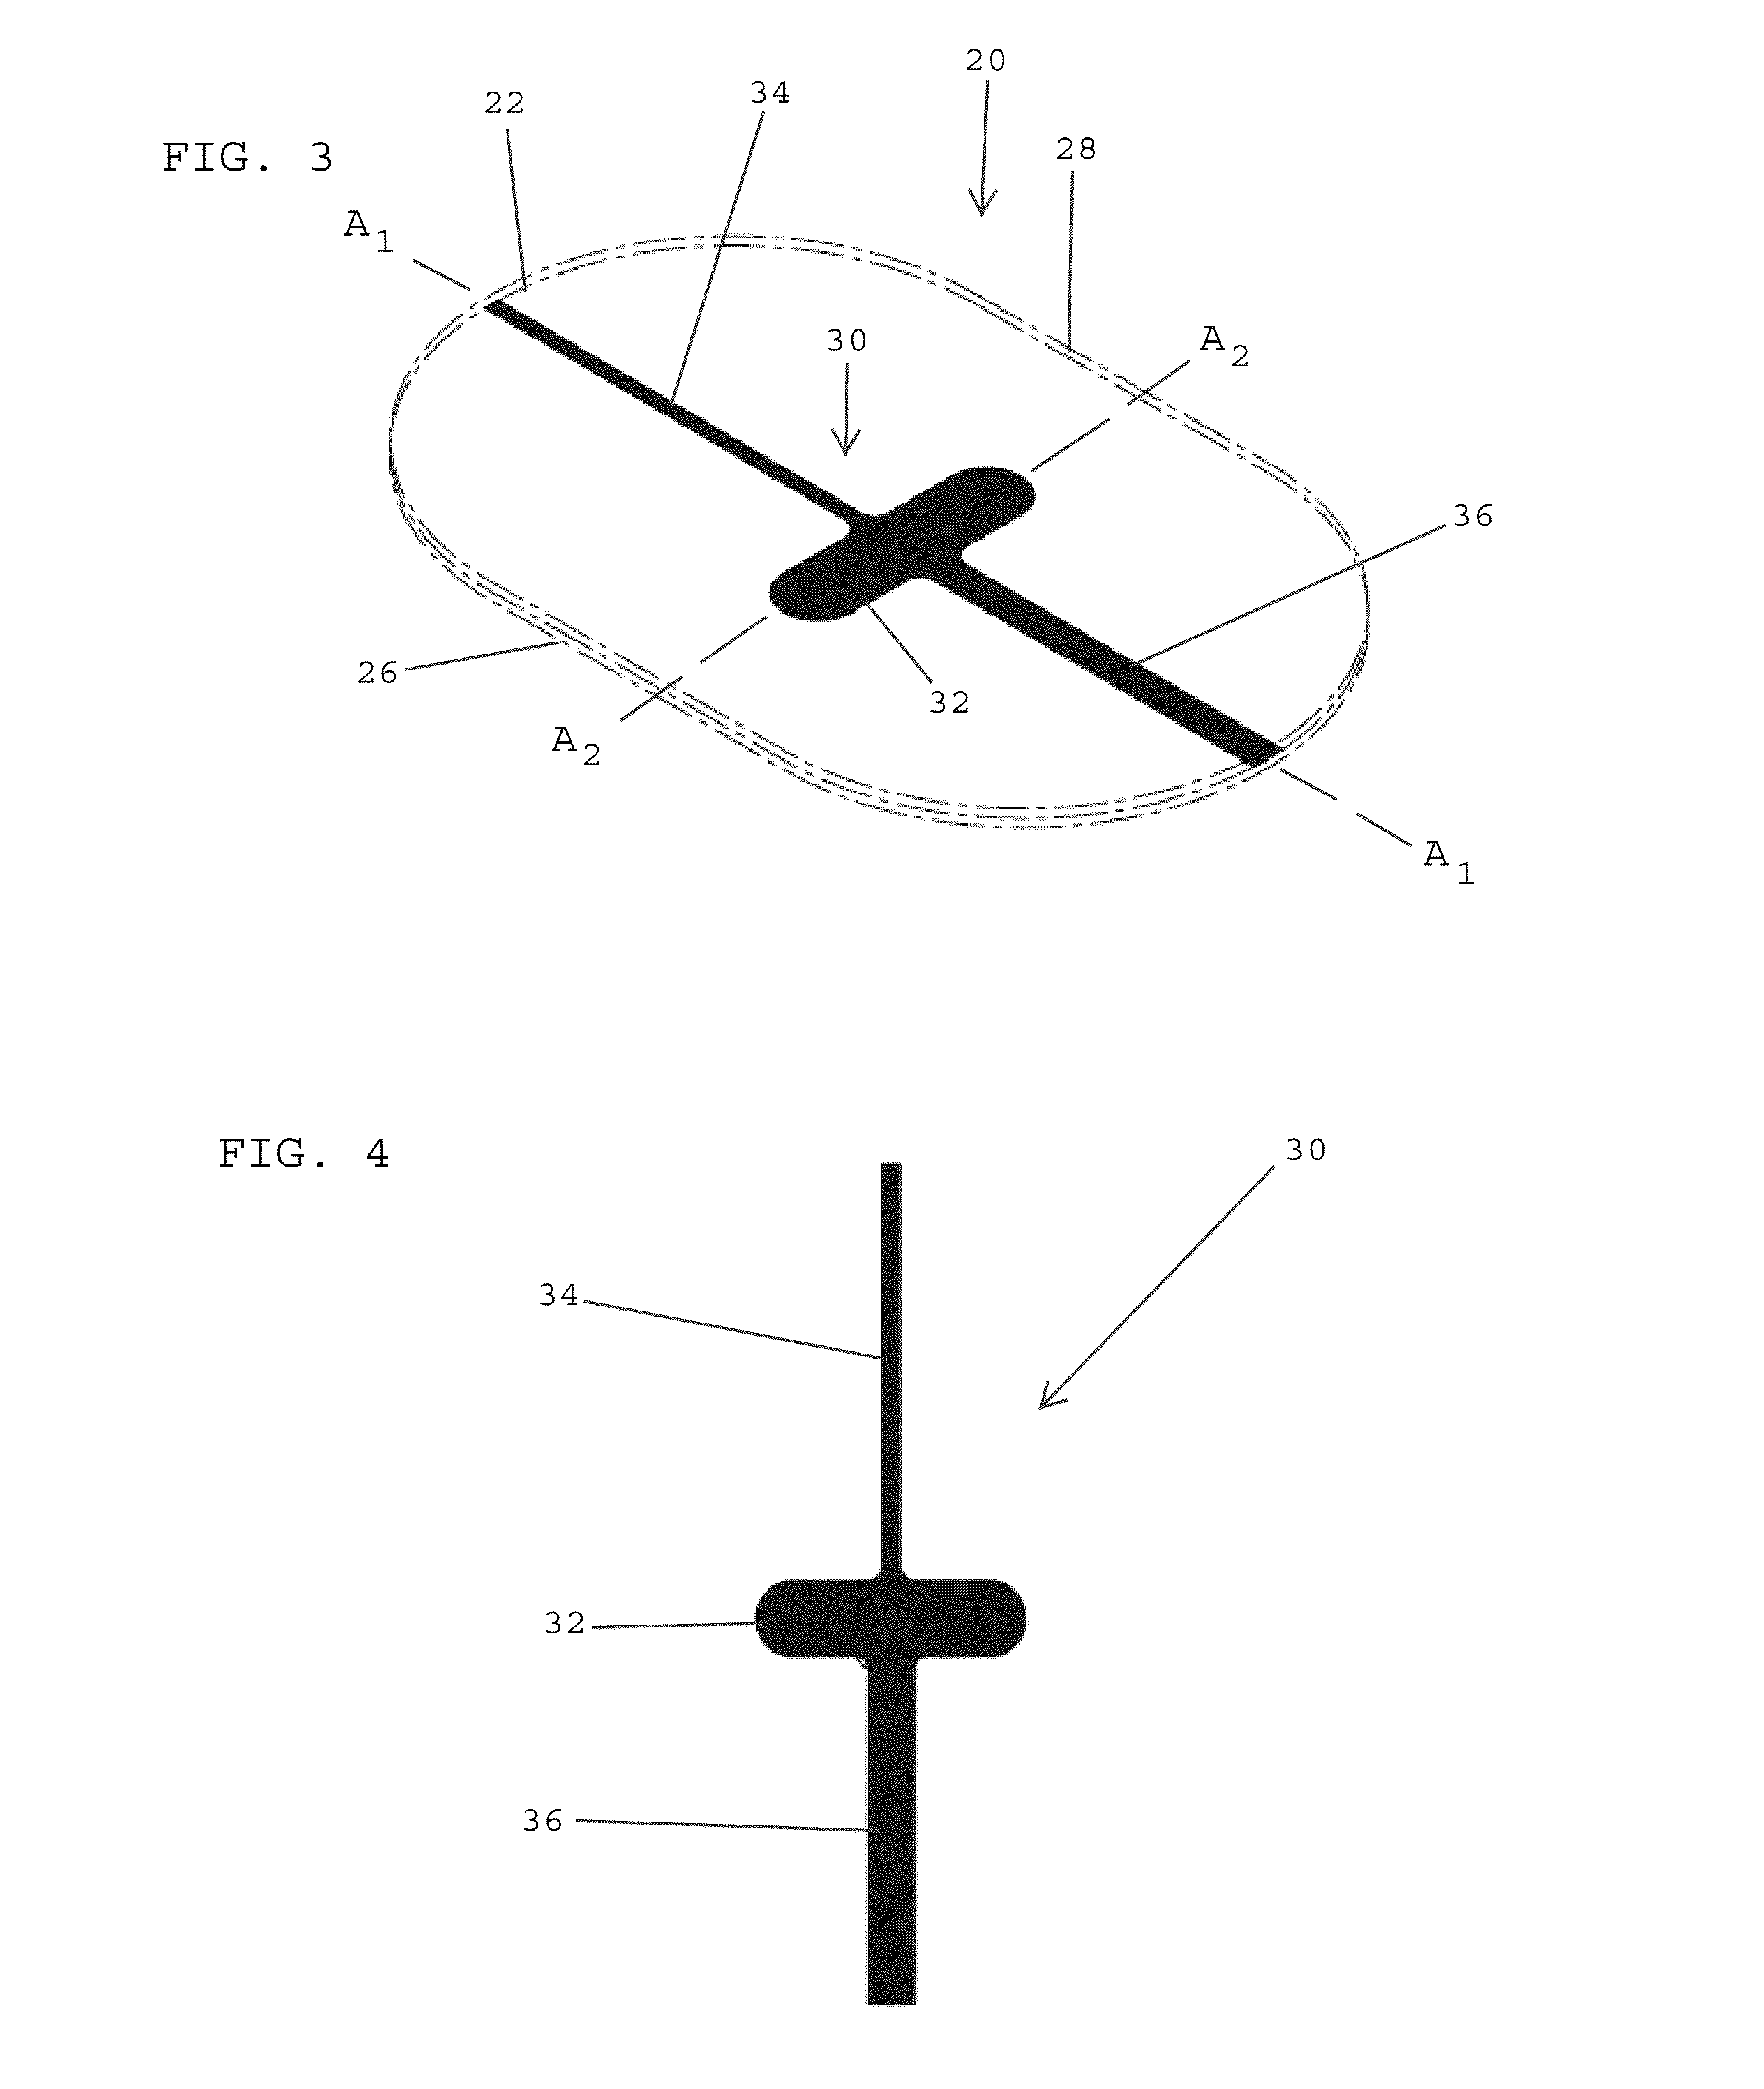 Composite anisotropic tissue reinforcing implants having alignment markers and methods of manufacturing same